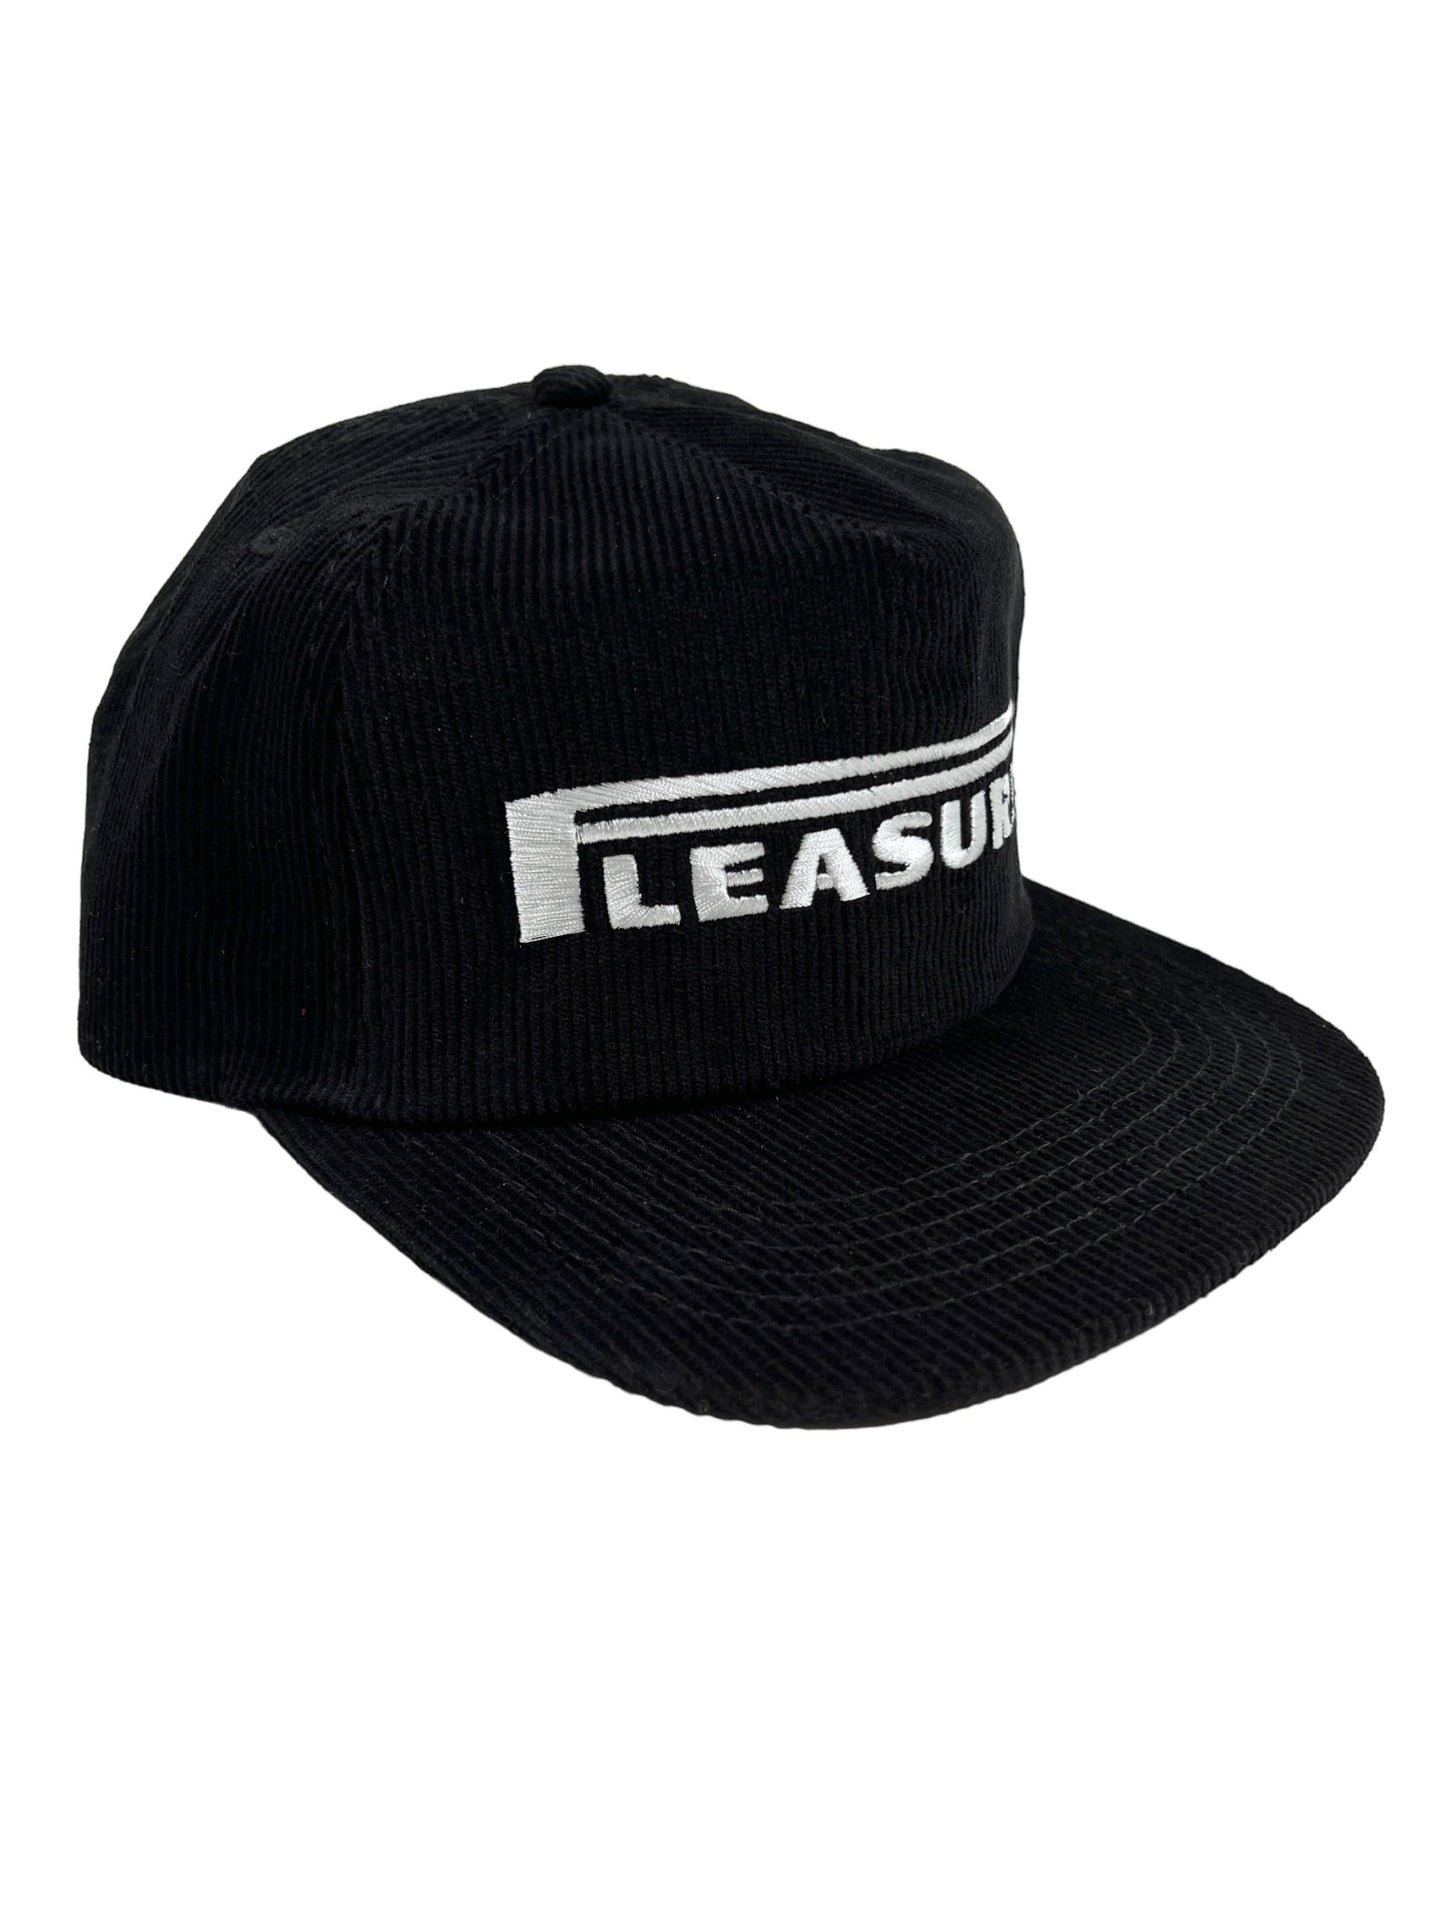 A black cotton corduroy ball cap with the word "leisure" embroidered on it.